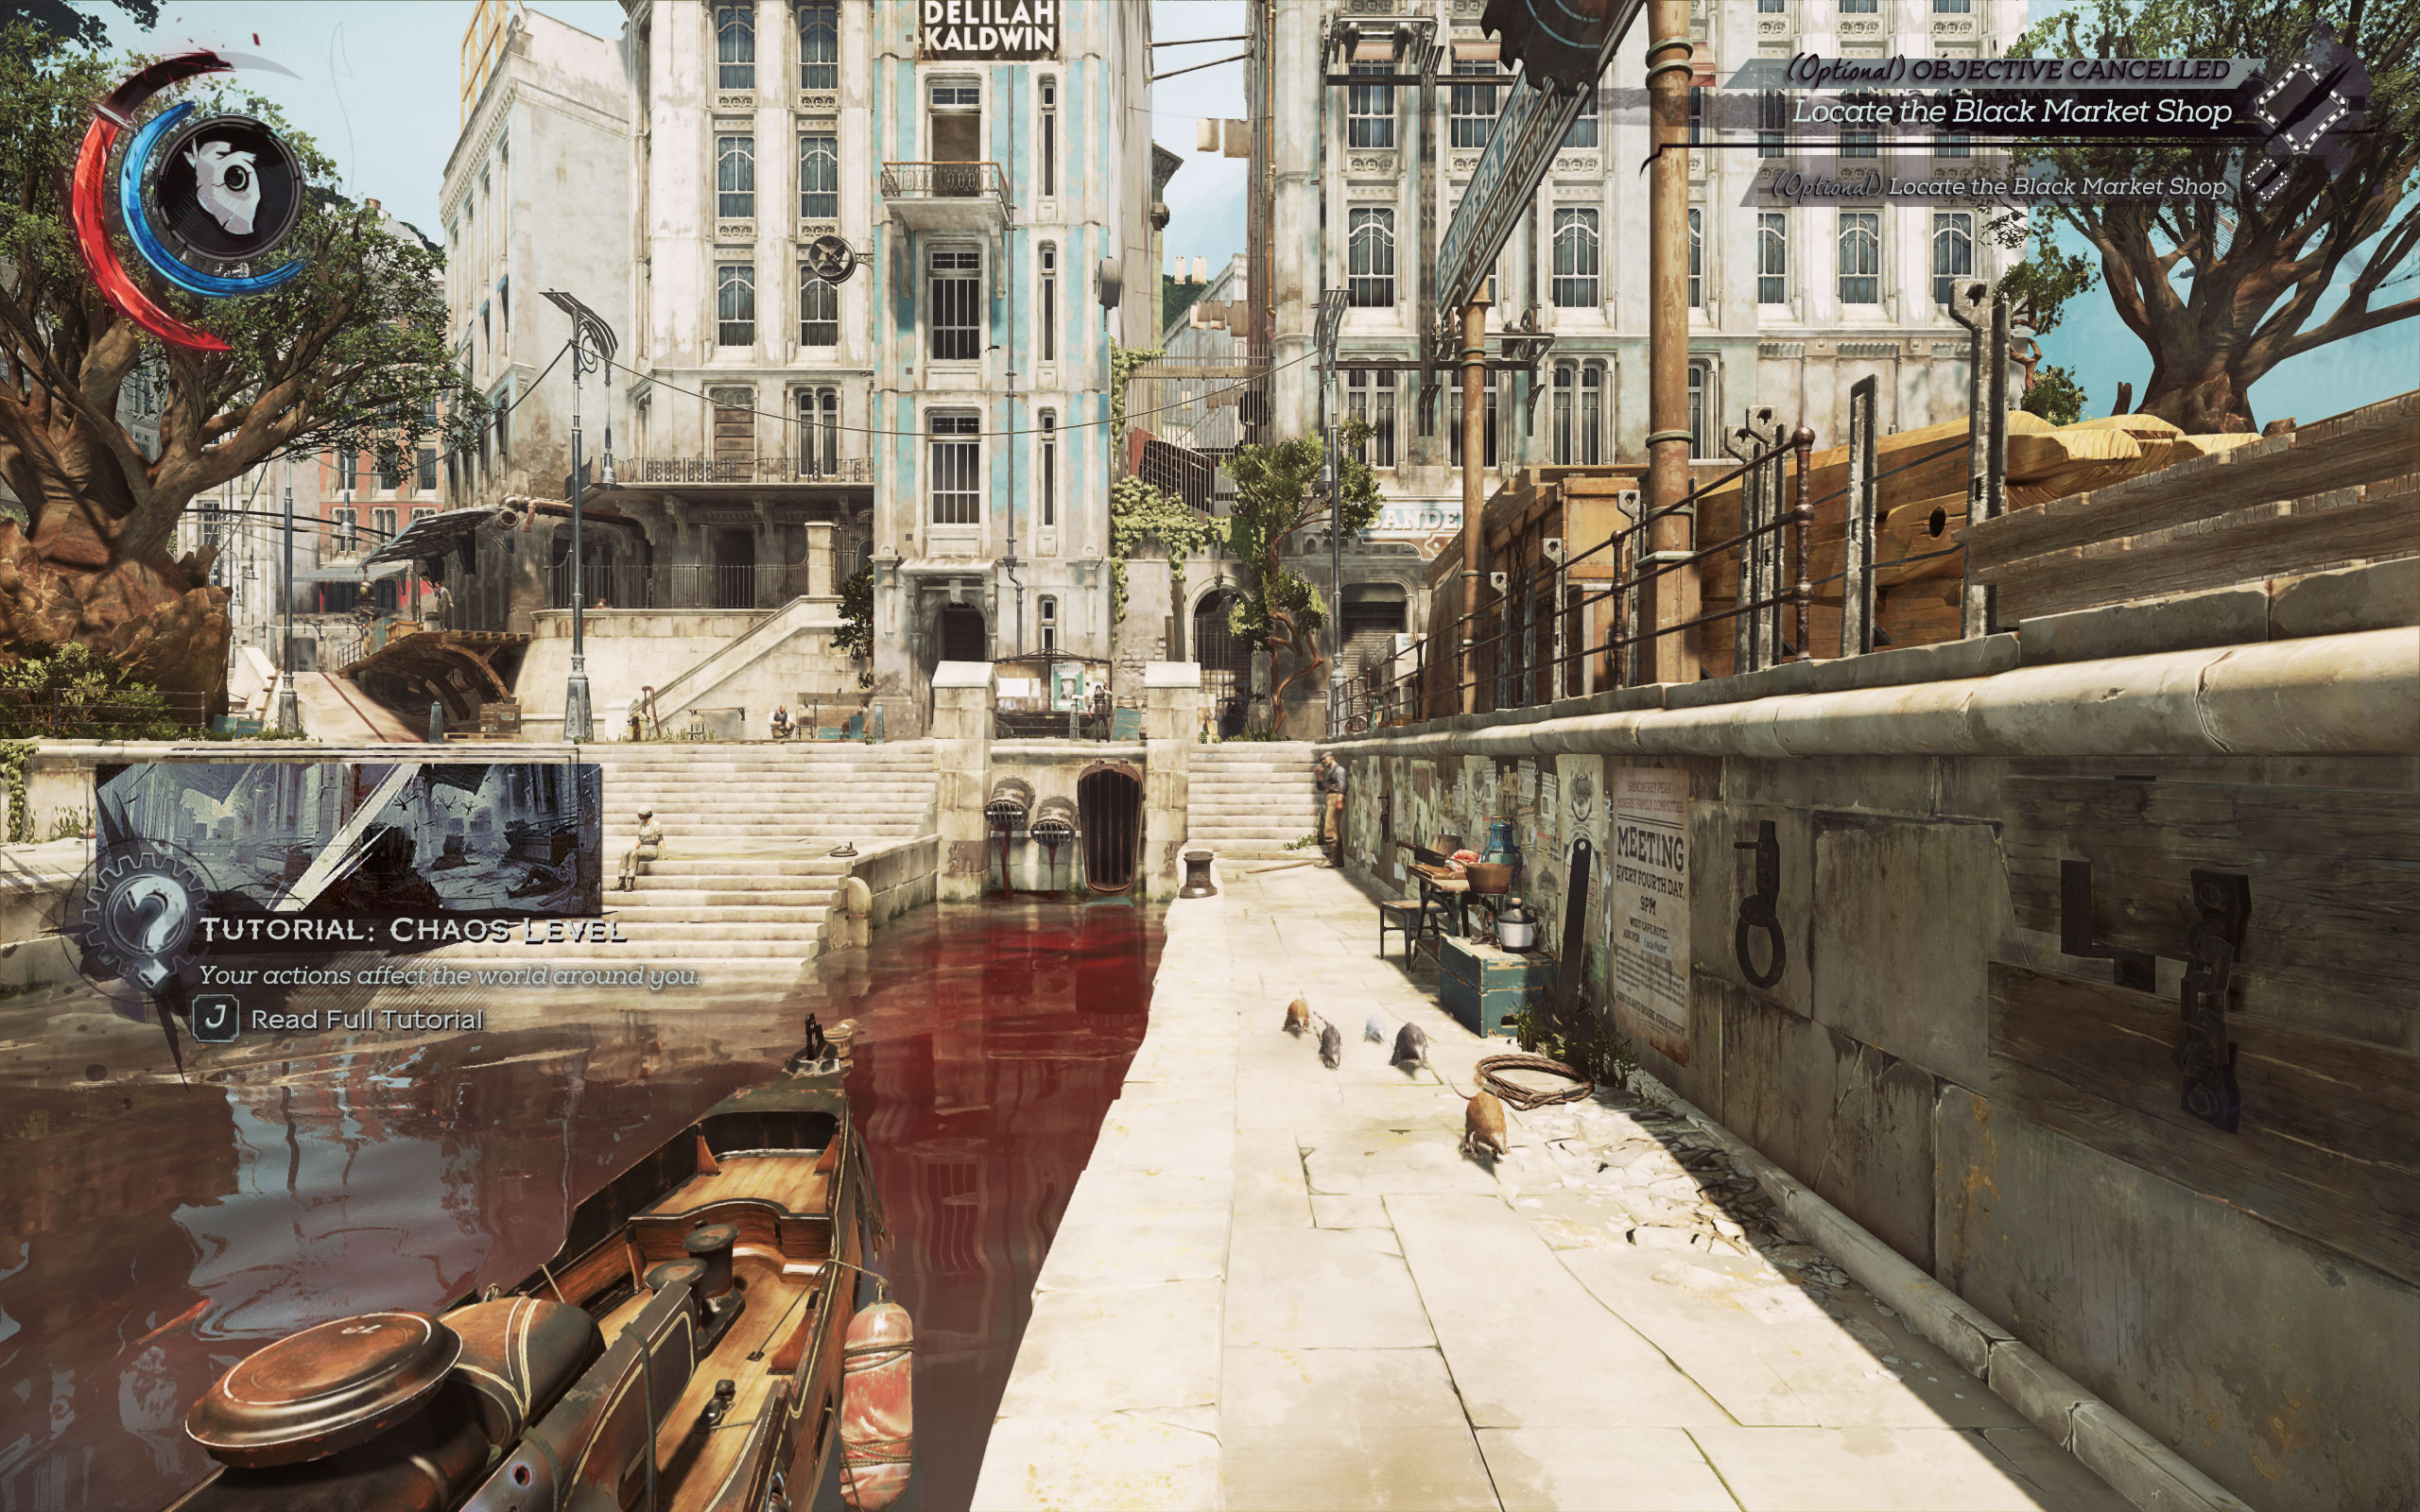 Dishonored 2 Details, Screenshots, and Gameplay